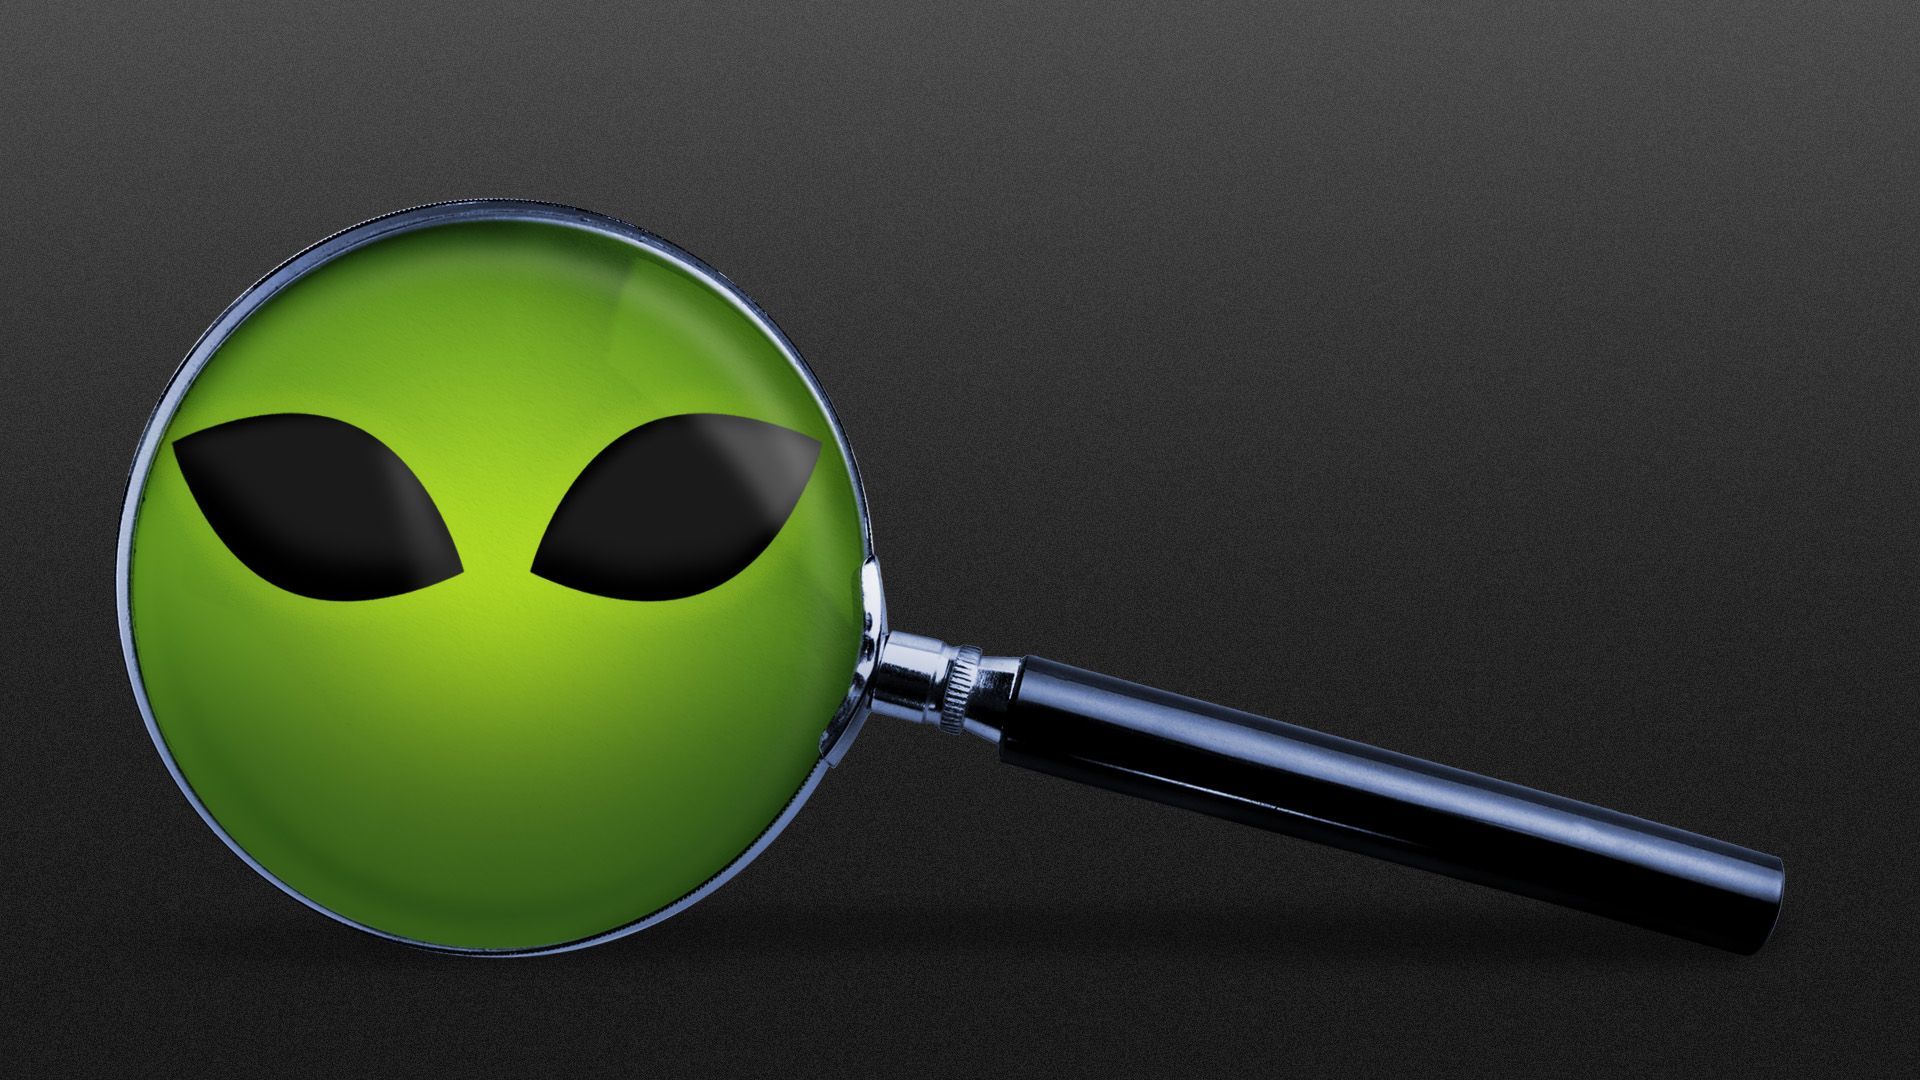 Illustration of a magnifying glass with the glass portion in the shape of an alien face with large eyes